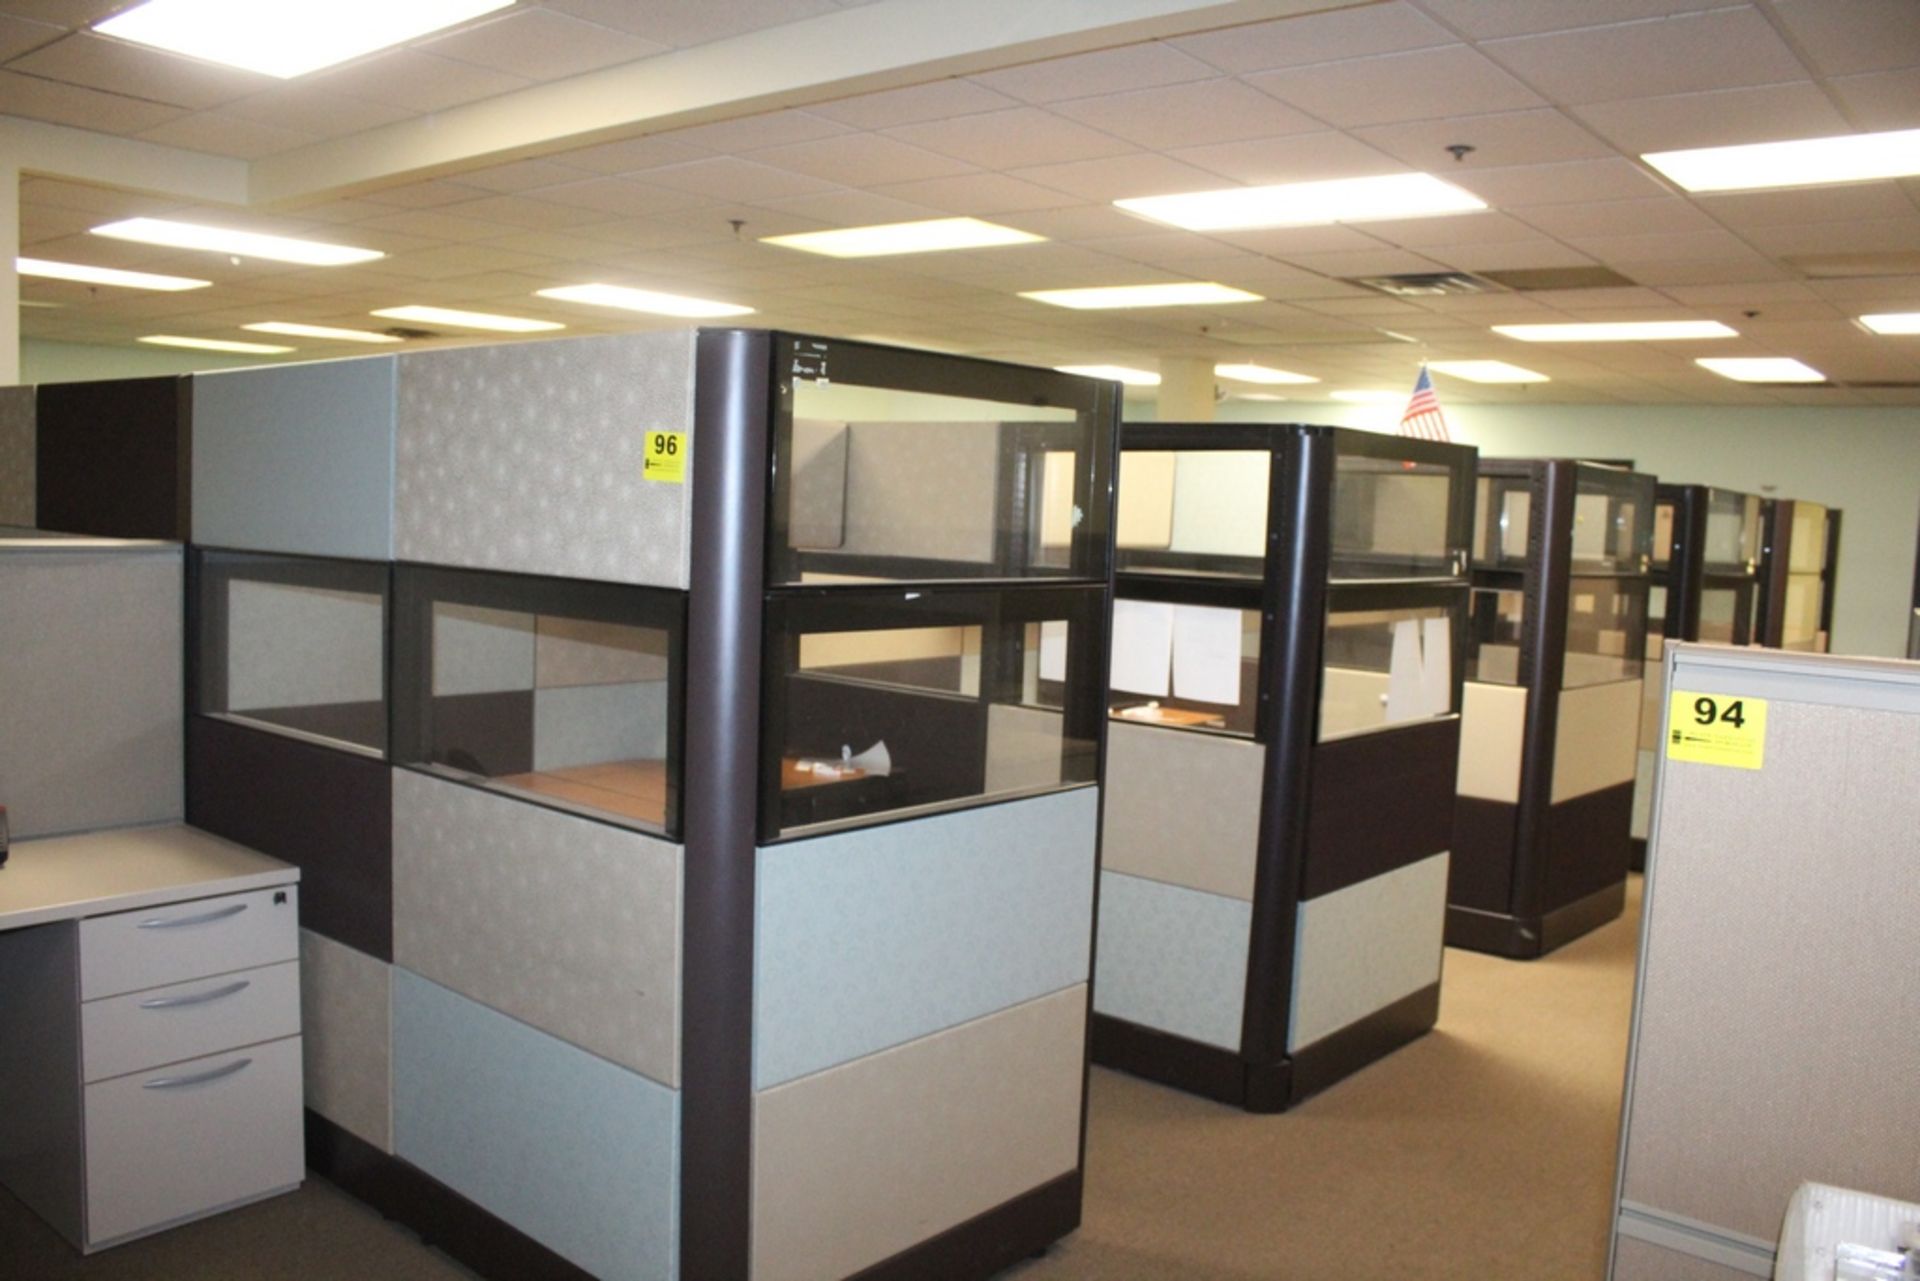 TEN STATION OFFICE CUBICLE, 32' X 12'5" X 71" OR 76" X 76" EACH